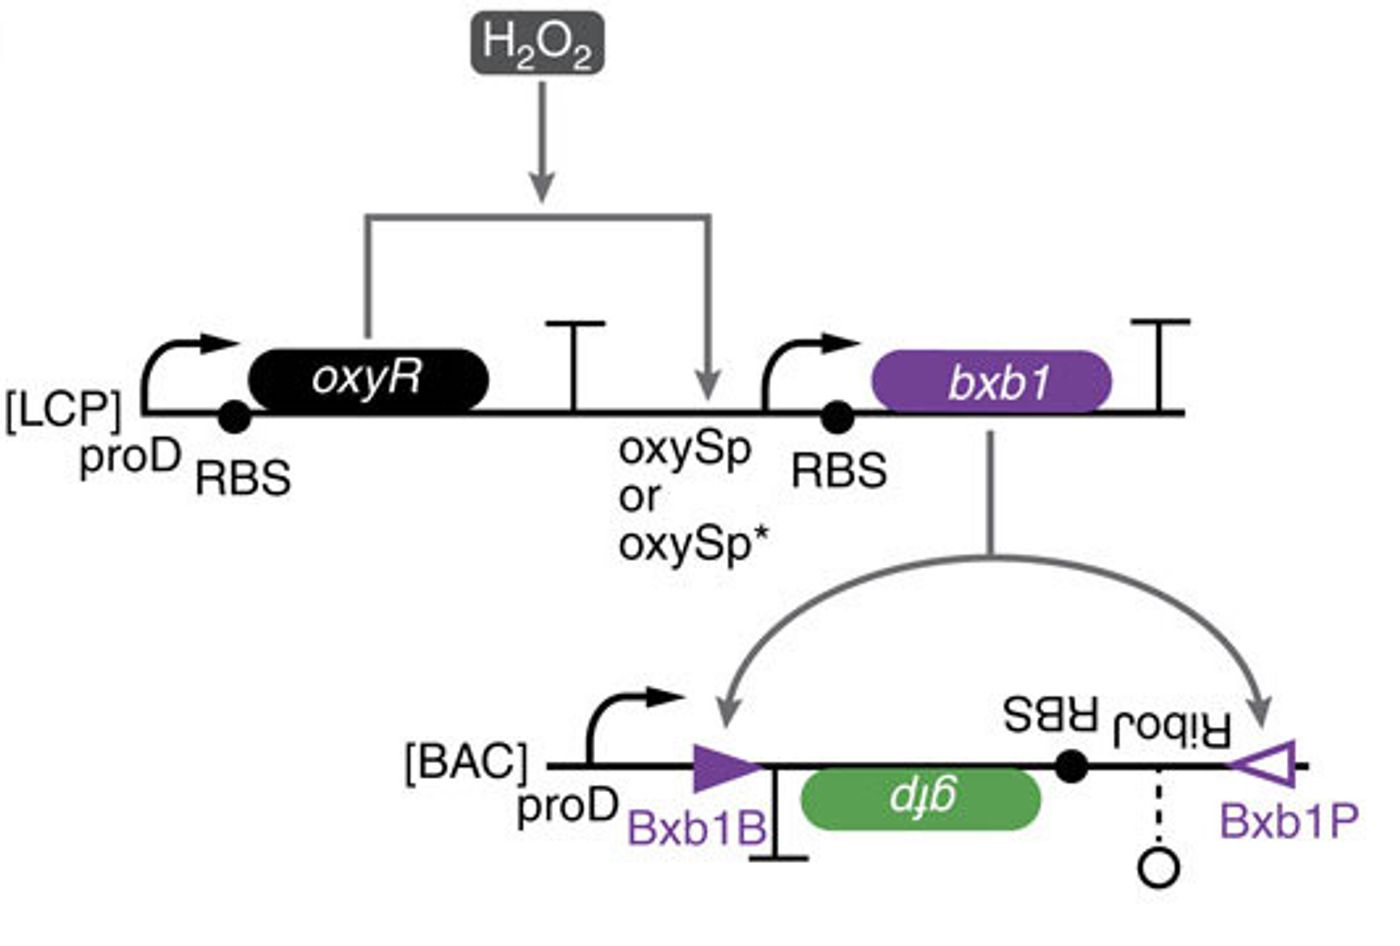 The low-threshold H2O2 comparator circuit: OxyR is constitutively expressed and activates transcription of bxb1 recombinase in response to H2O2. Bxb1 inverts the gfp expression cassette thus turning on GFP expression. The gfp cassette can cleave the 5?-untranslated region of an mRNA transcript (RiboJ)61, a computationally designed RBS62, the gfp-coding sequence and a transcriptional terminator.